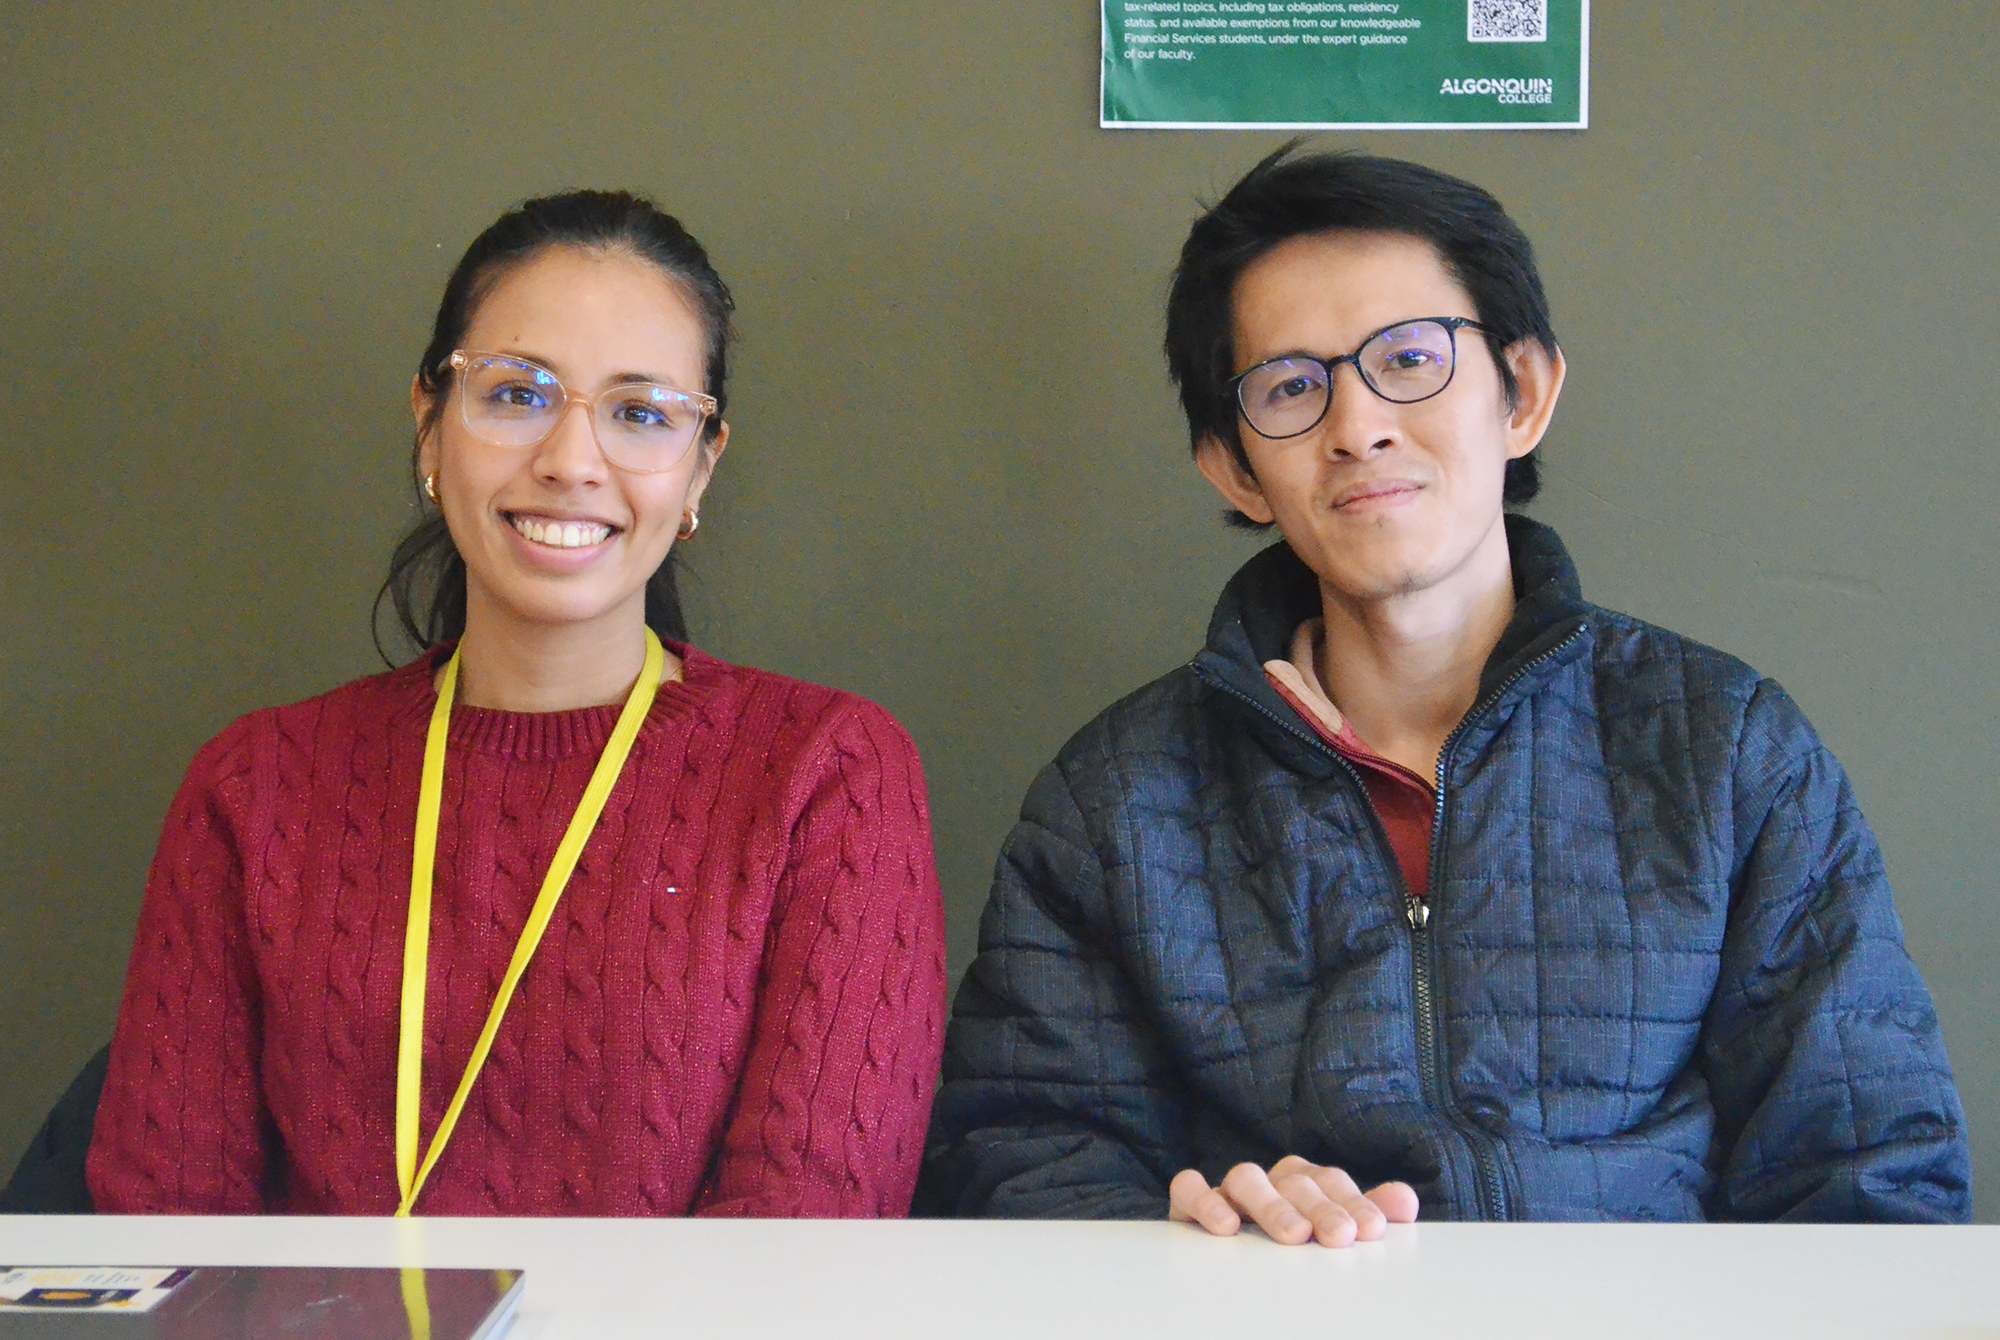 Daniela Estupinan (left) and Dane Ly (right) are ready to help at the student led tax workshop.